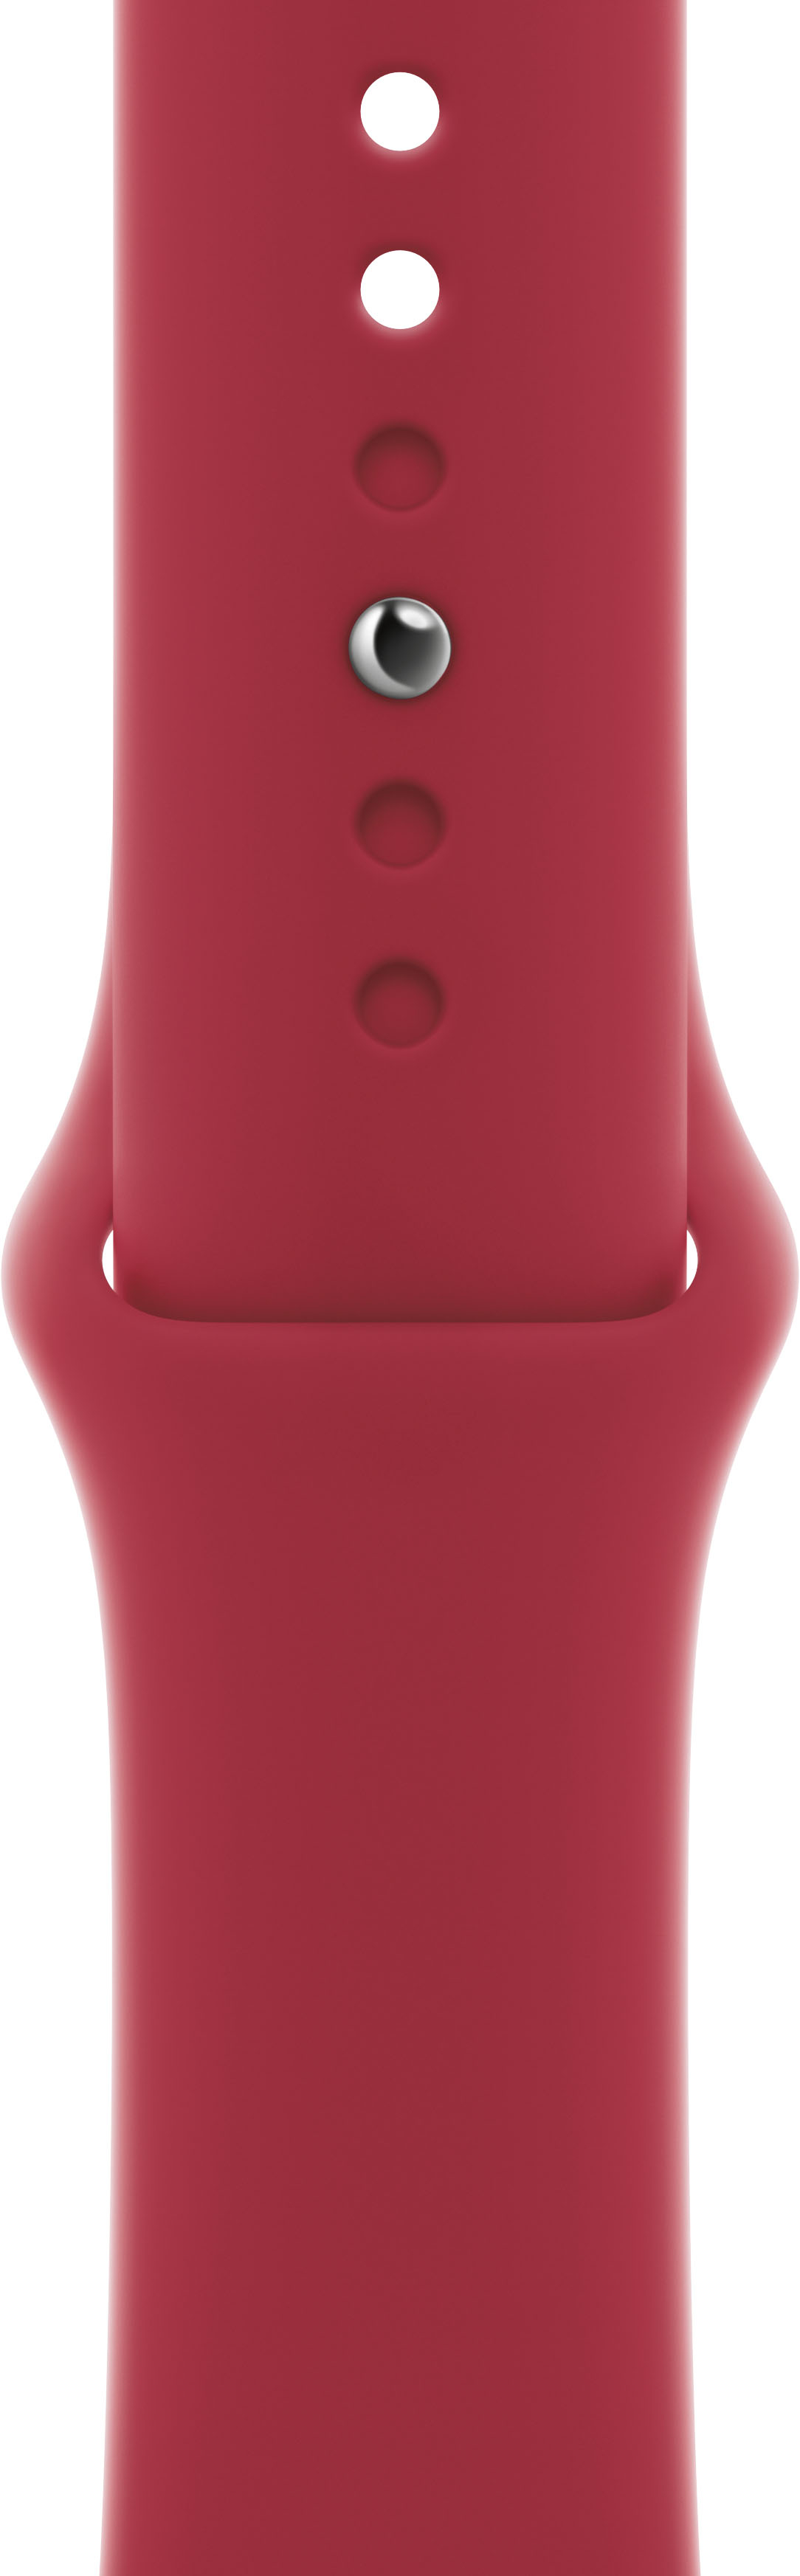 Band - MKUD3AM/A 41mm Apple Best Sport Buy Watch™ (PRODUCT)RED for